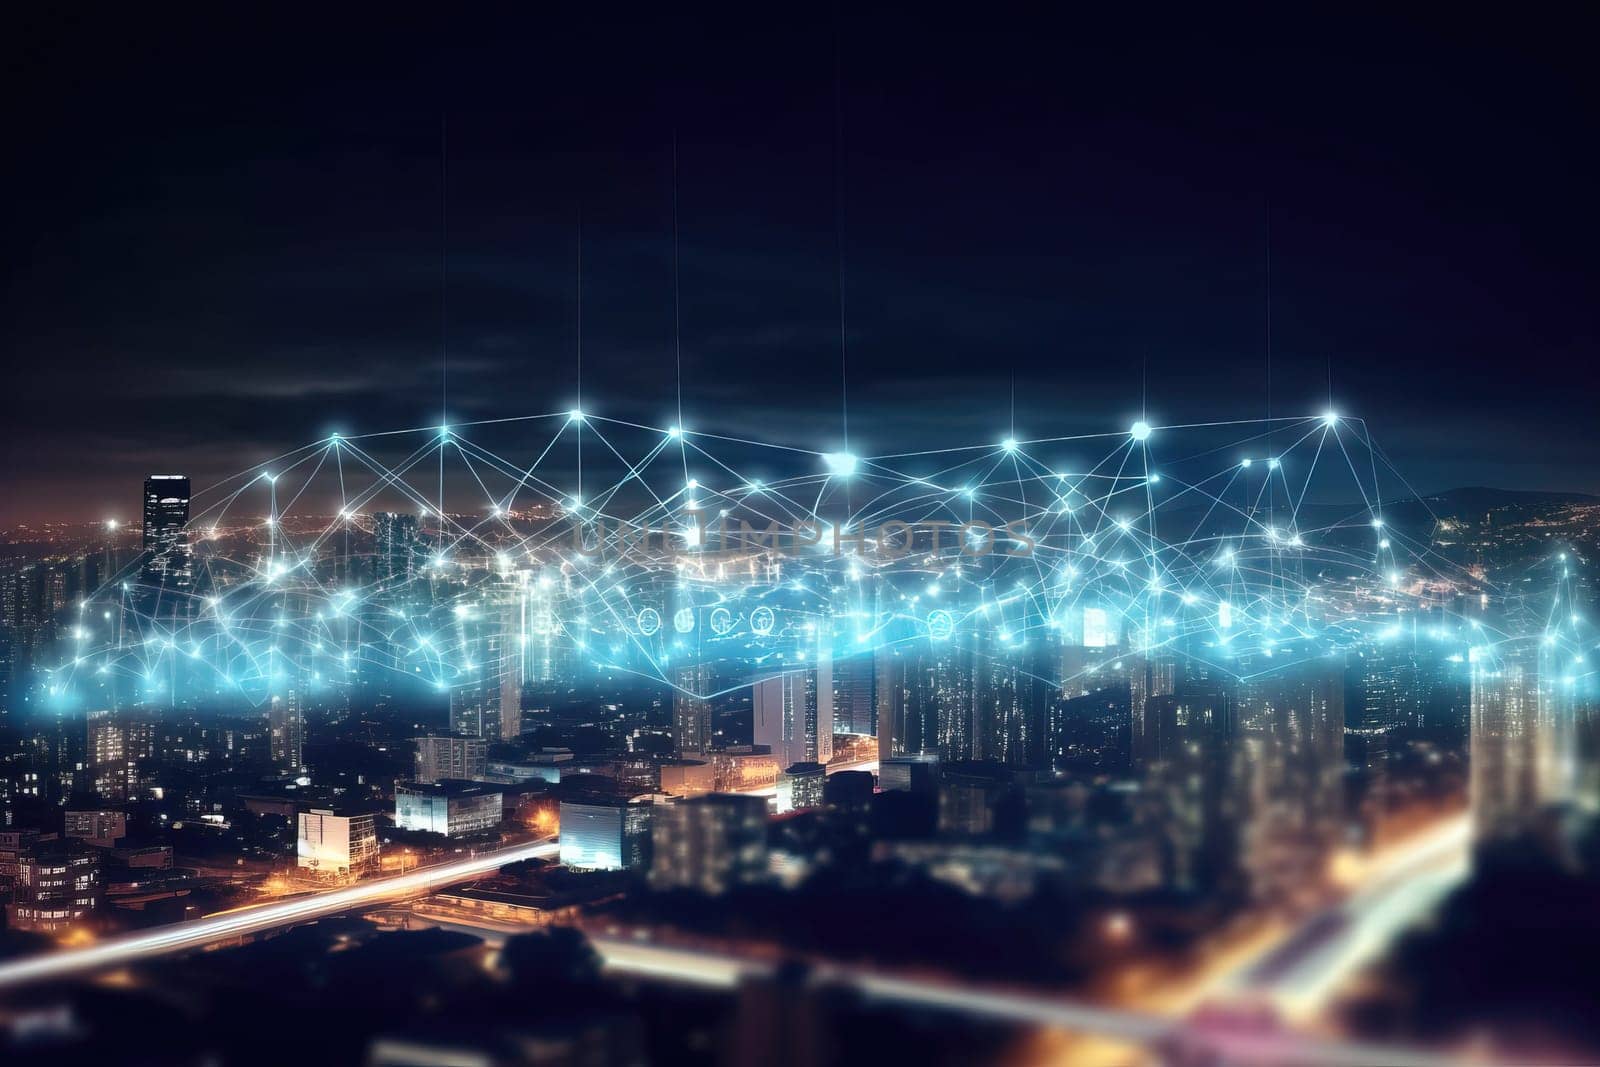 Illustration Of Modern Night City With Blue Lights And Trails In The Sky, Communications And High Speed Internet Technologies In The City by GekaSkr